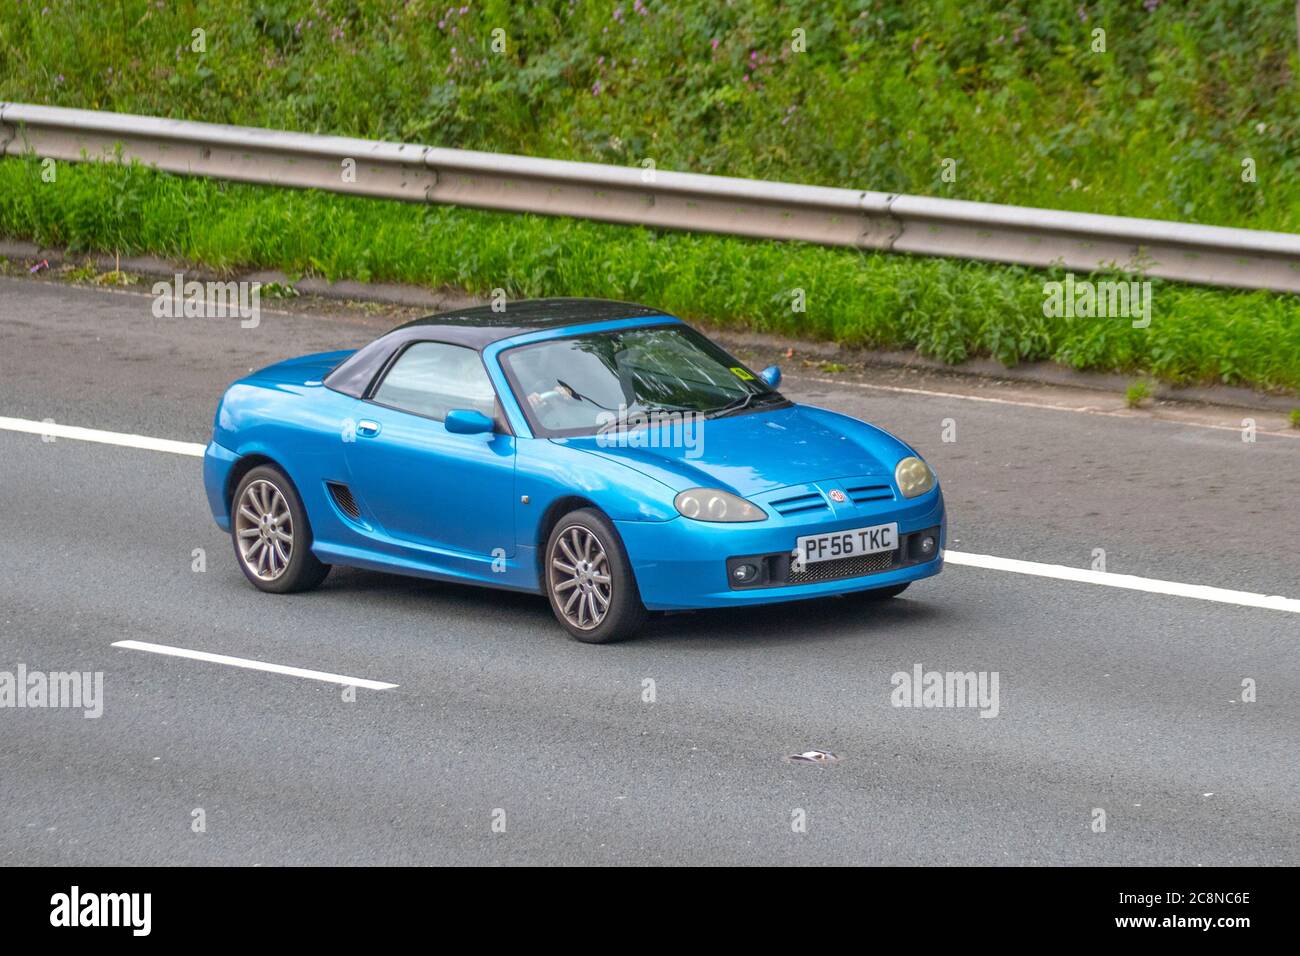 2007 MG MG TF Spark 135; Vehicular traffic moving vehicles, sportscars driving vehicle on UK roads, motors, motoring on the M6 motorway highway network. Stock Photo